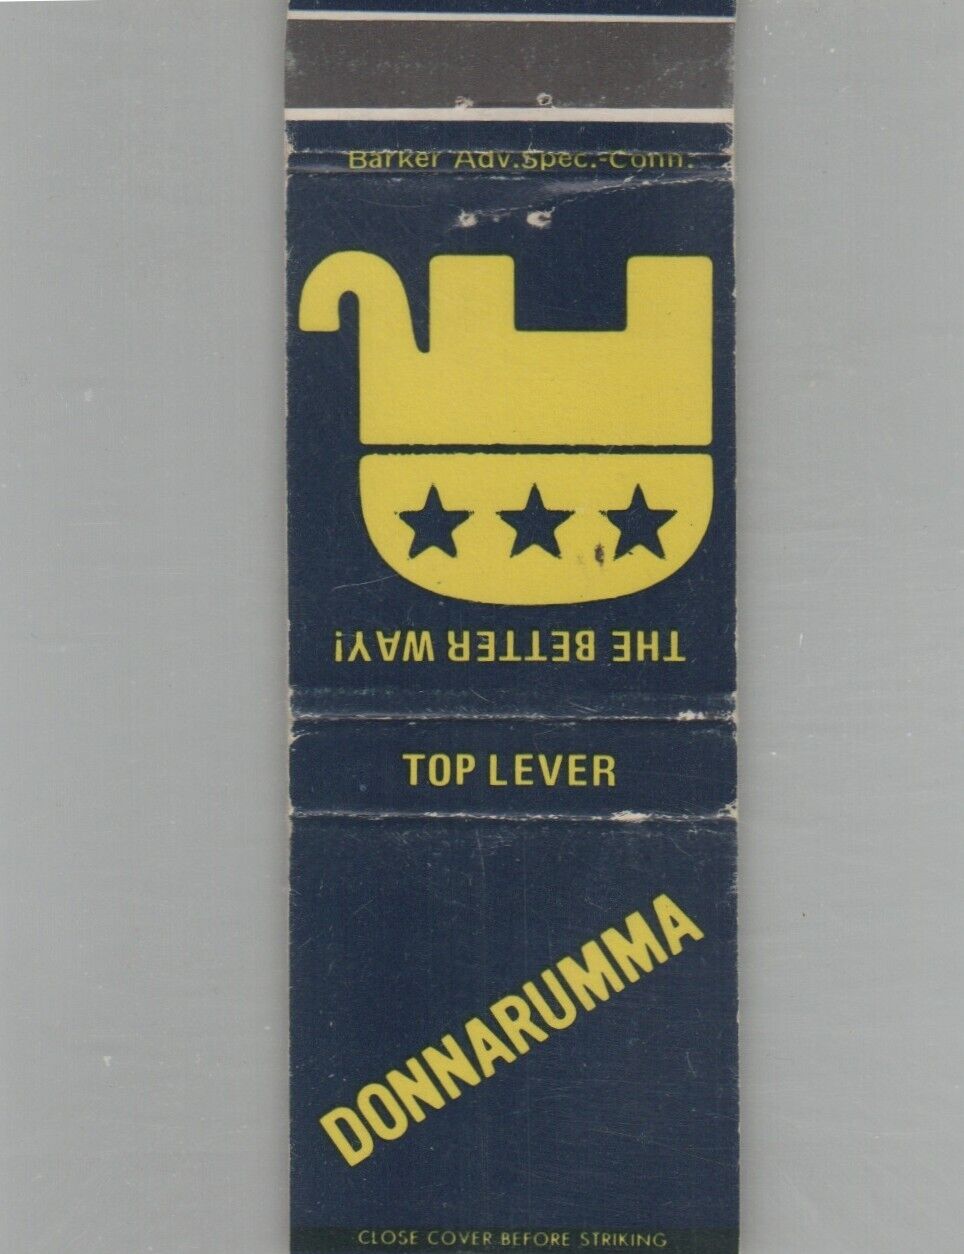 Matchbook Cover - Elephant Donnarumma Top Lever - The Better Way